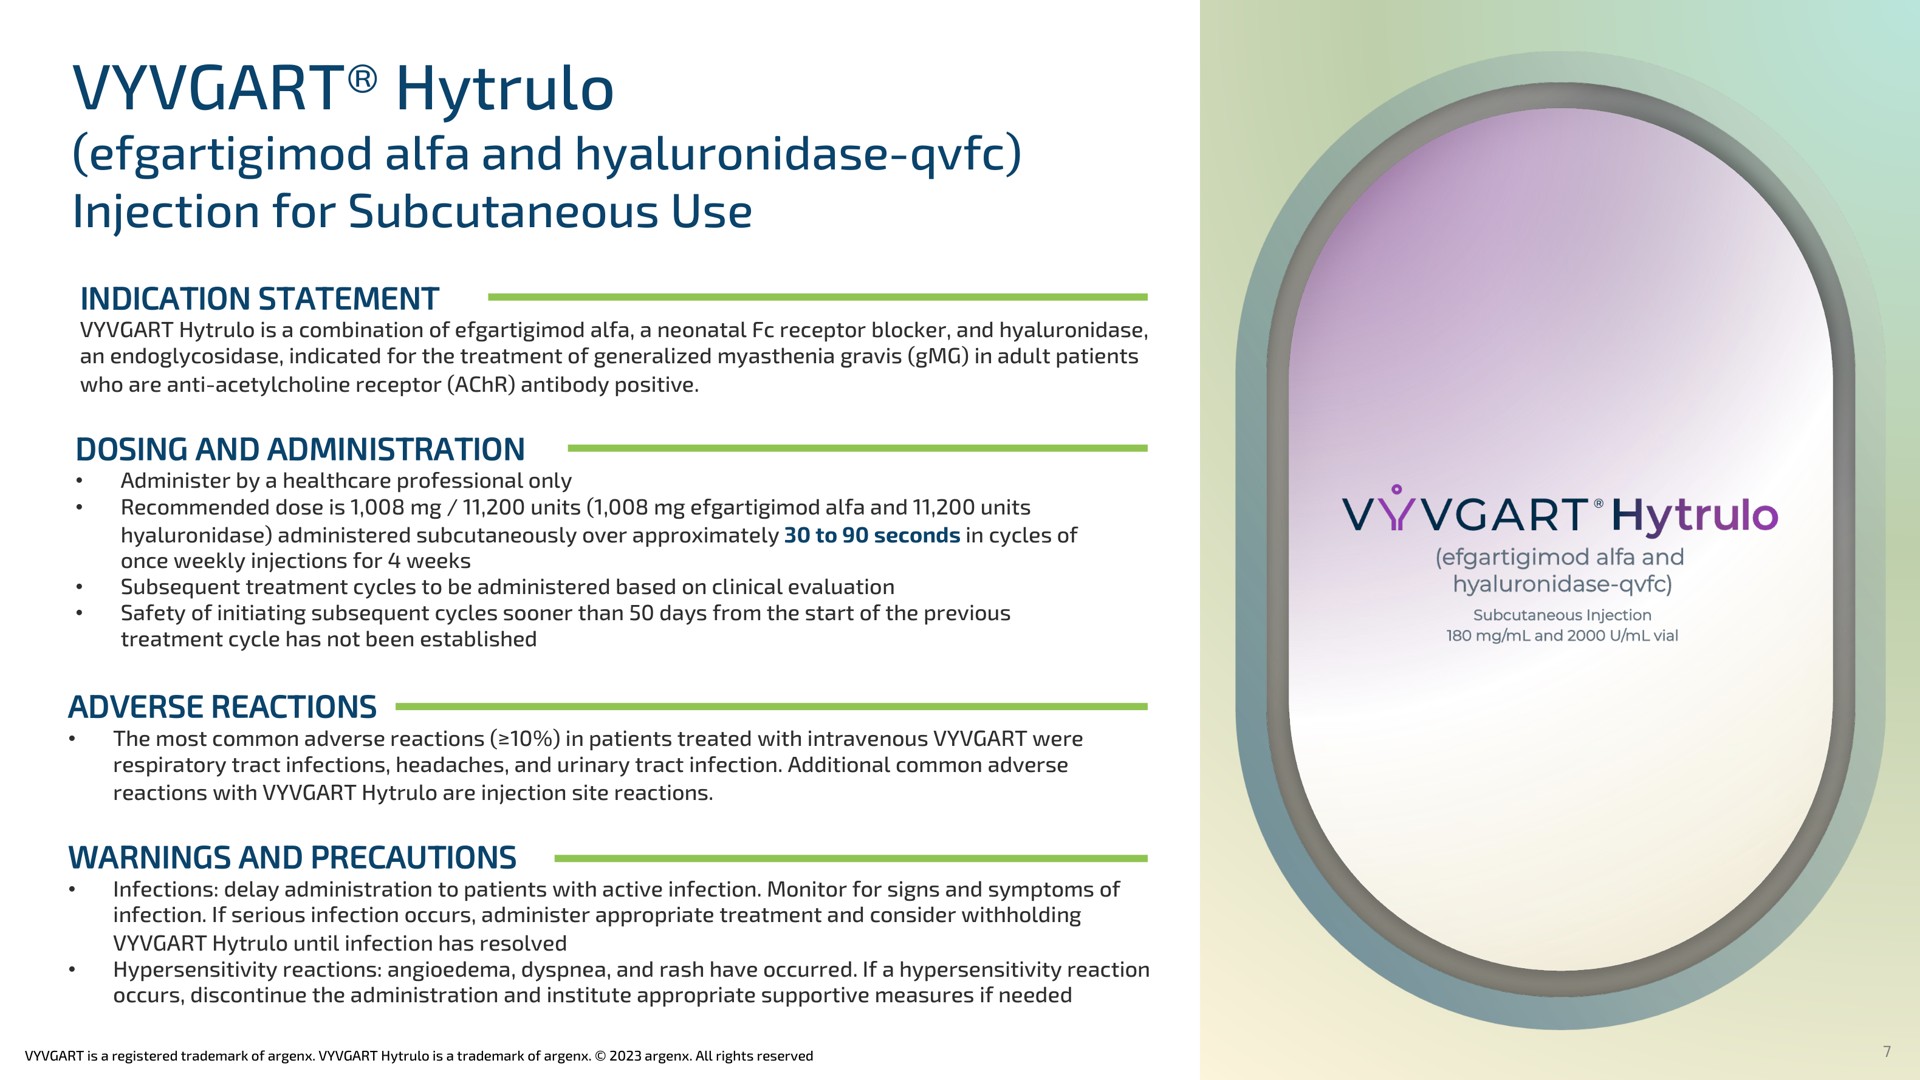 alfa and hyaluronidase injection for subcutaneous use | argenx SE